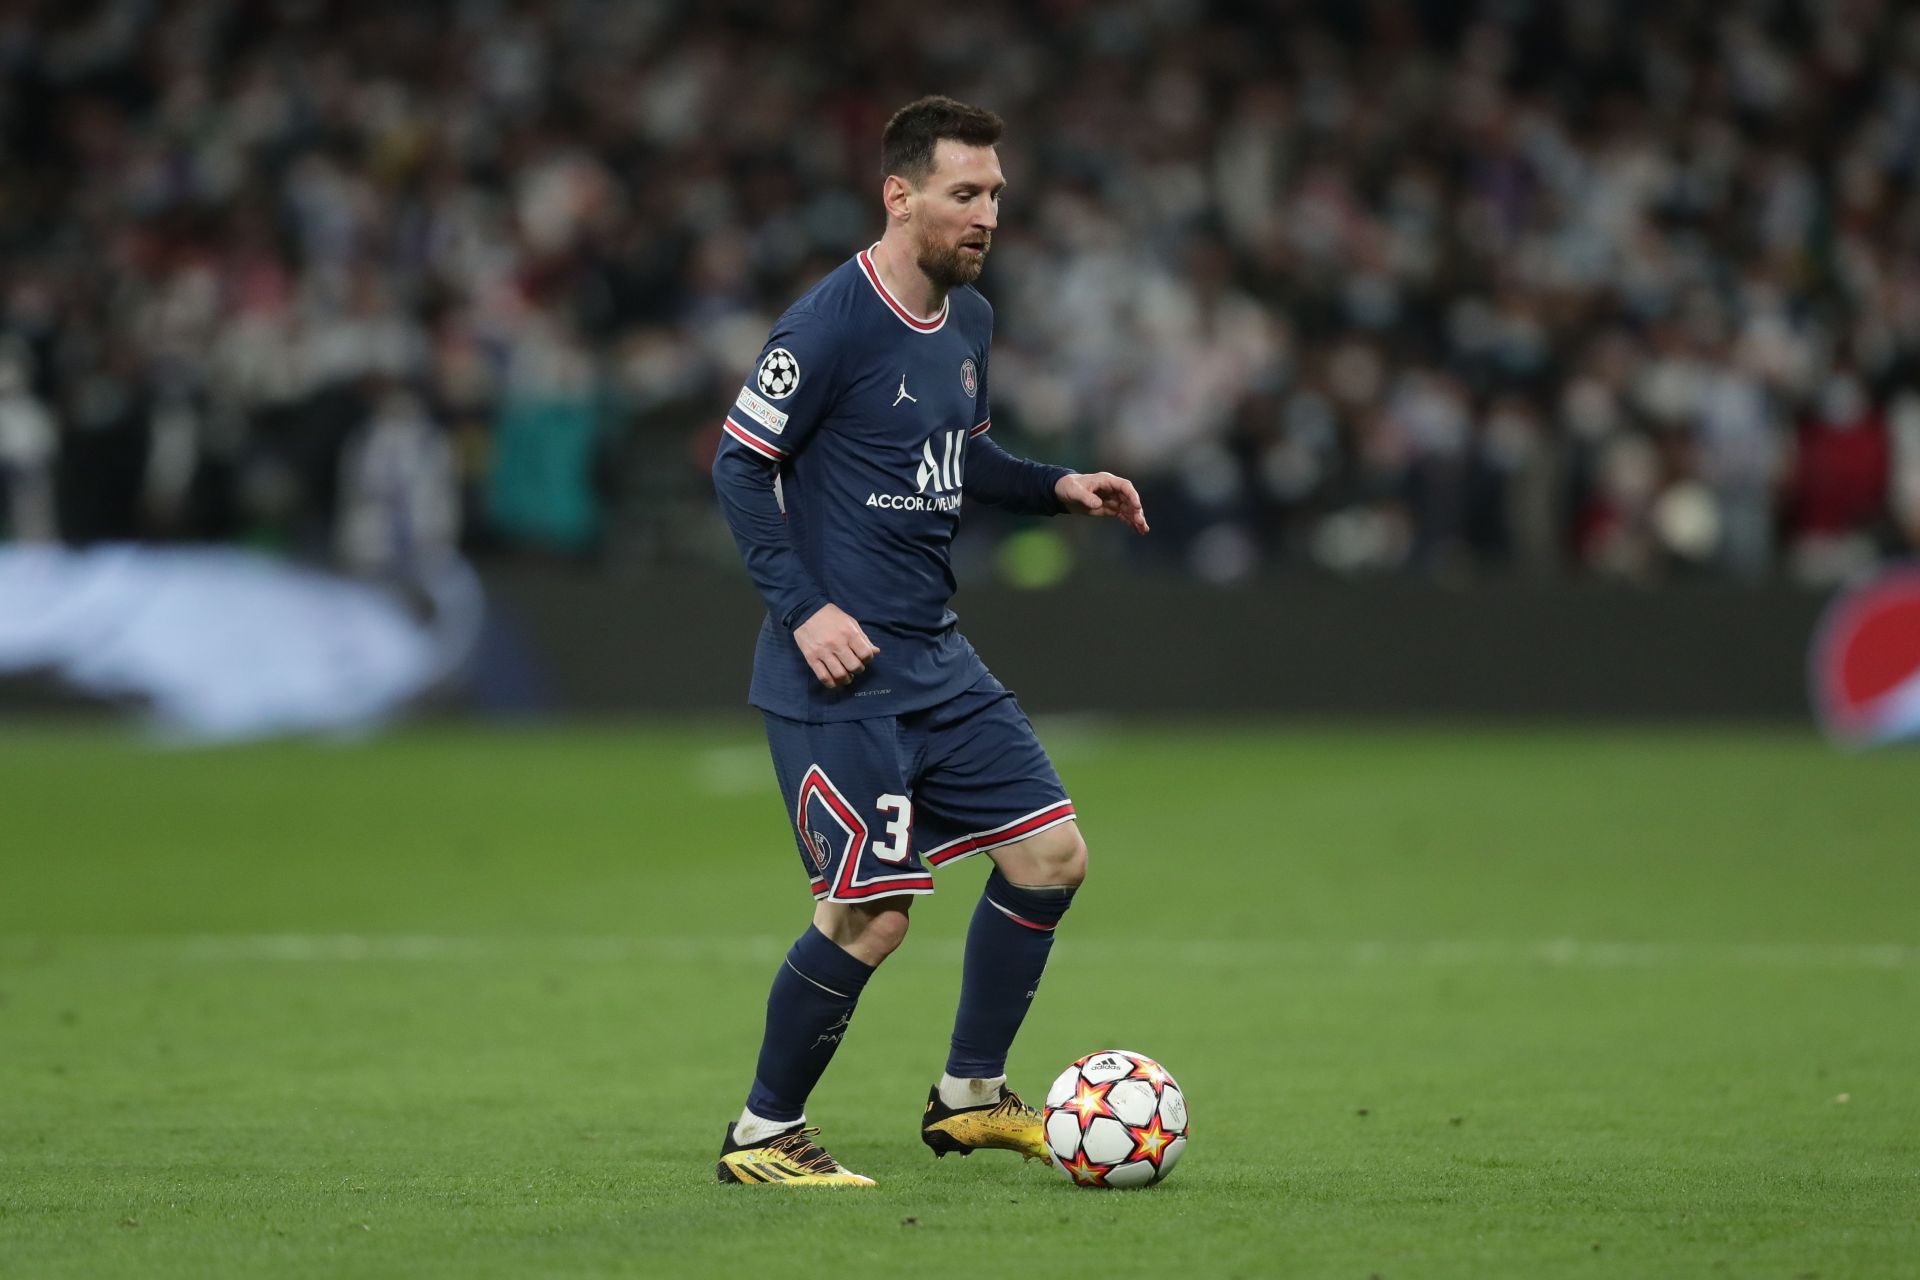 Lionel Messi has endured a difficult debut season in Ligue 1.